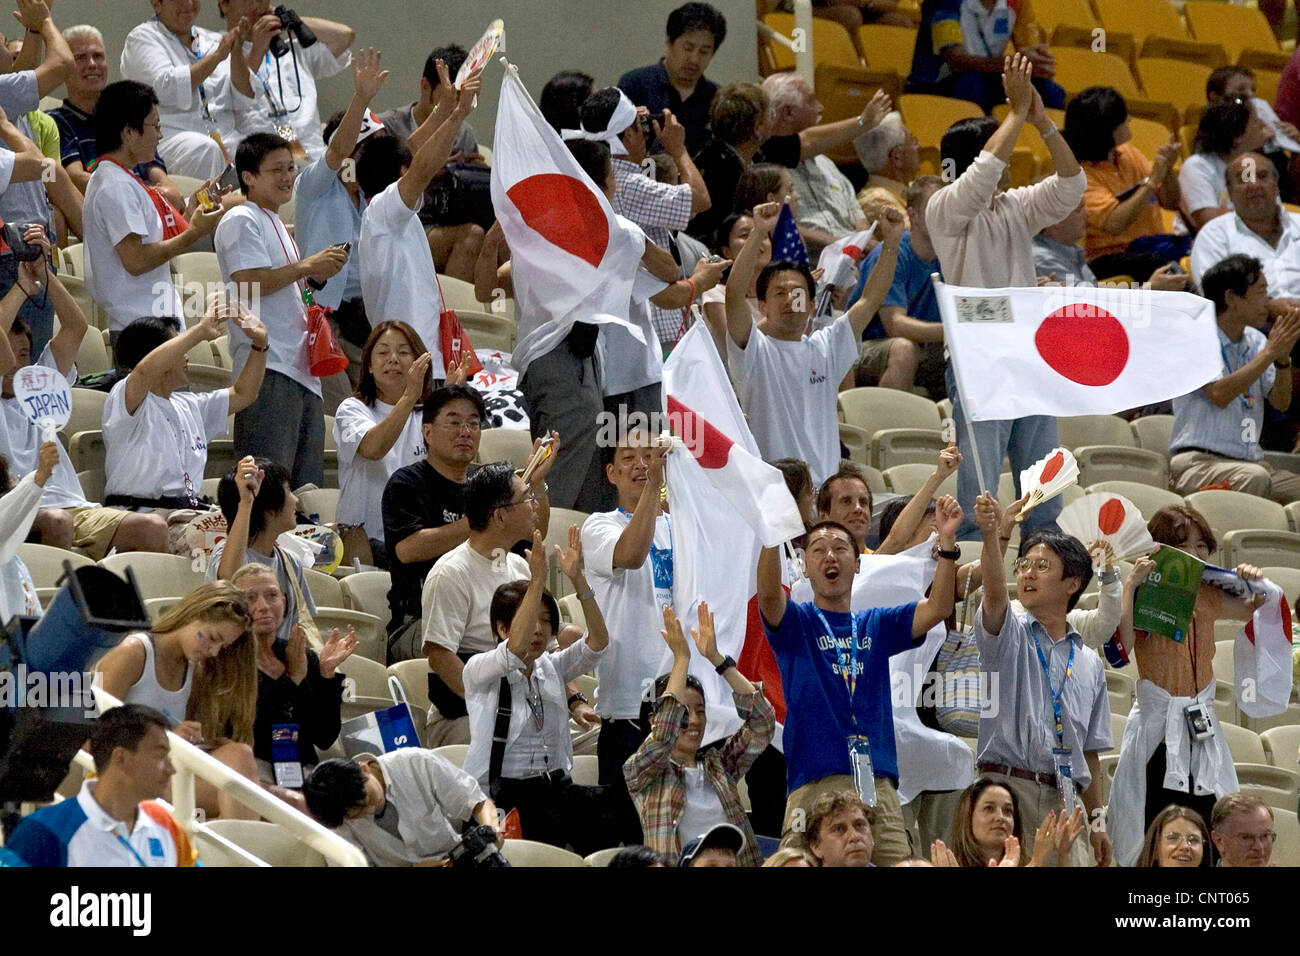 GYMNASTICS Japanese fans cheering during the men's team final 2004 Olympic Summer Games, Athens, Greece. August 16, 2004 Stock Photo